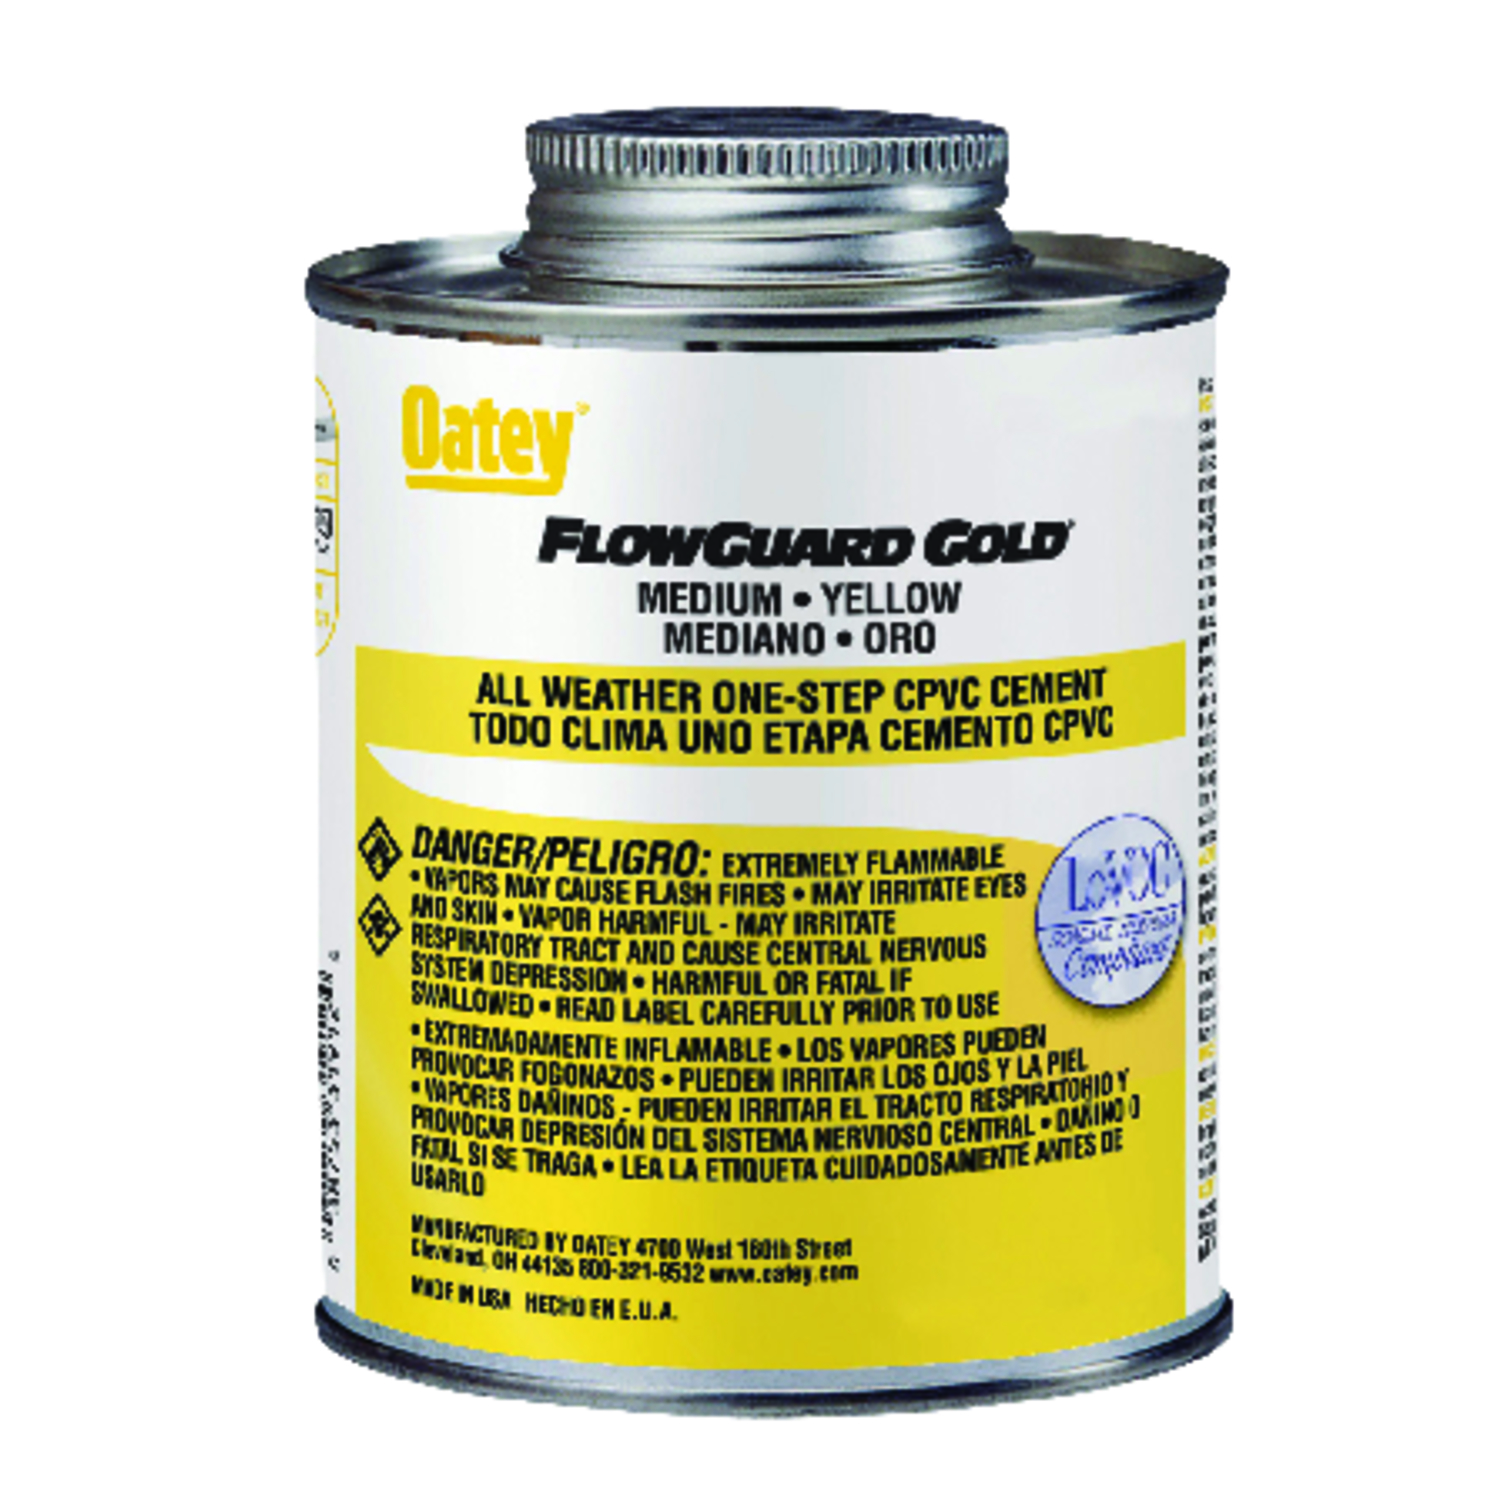 UPC 038753319124 product image for Oatey FlowGuard Gold All Weather One-Step Yellow For CPVC 16 oz. Cement | upcitemdb.com